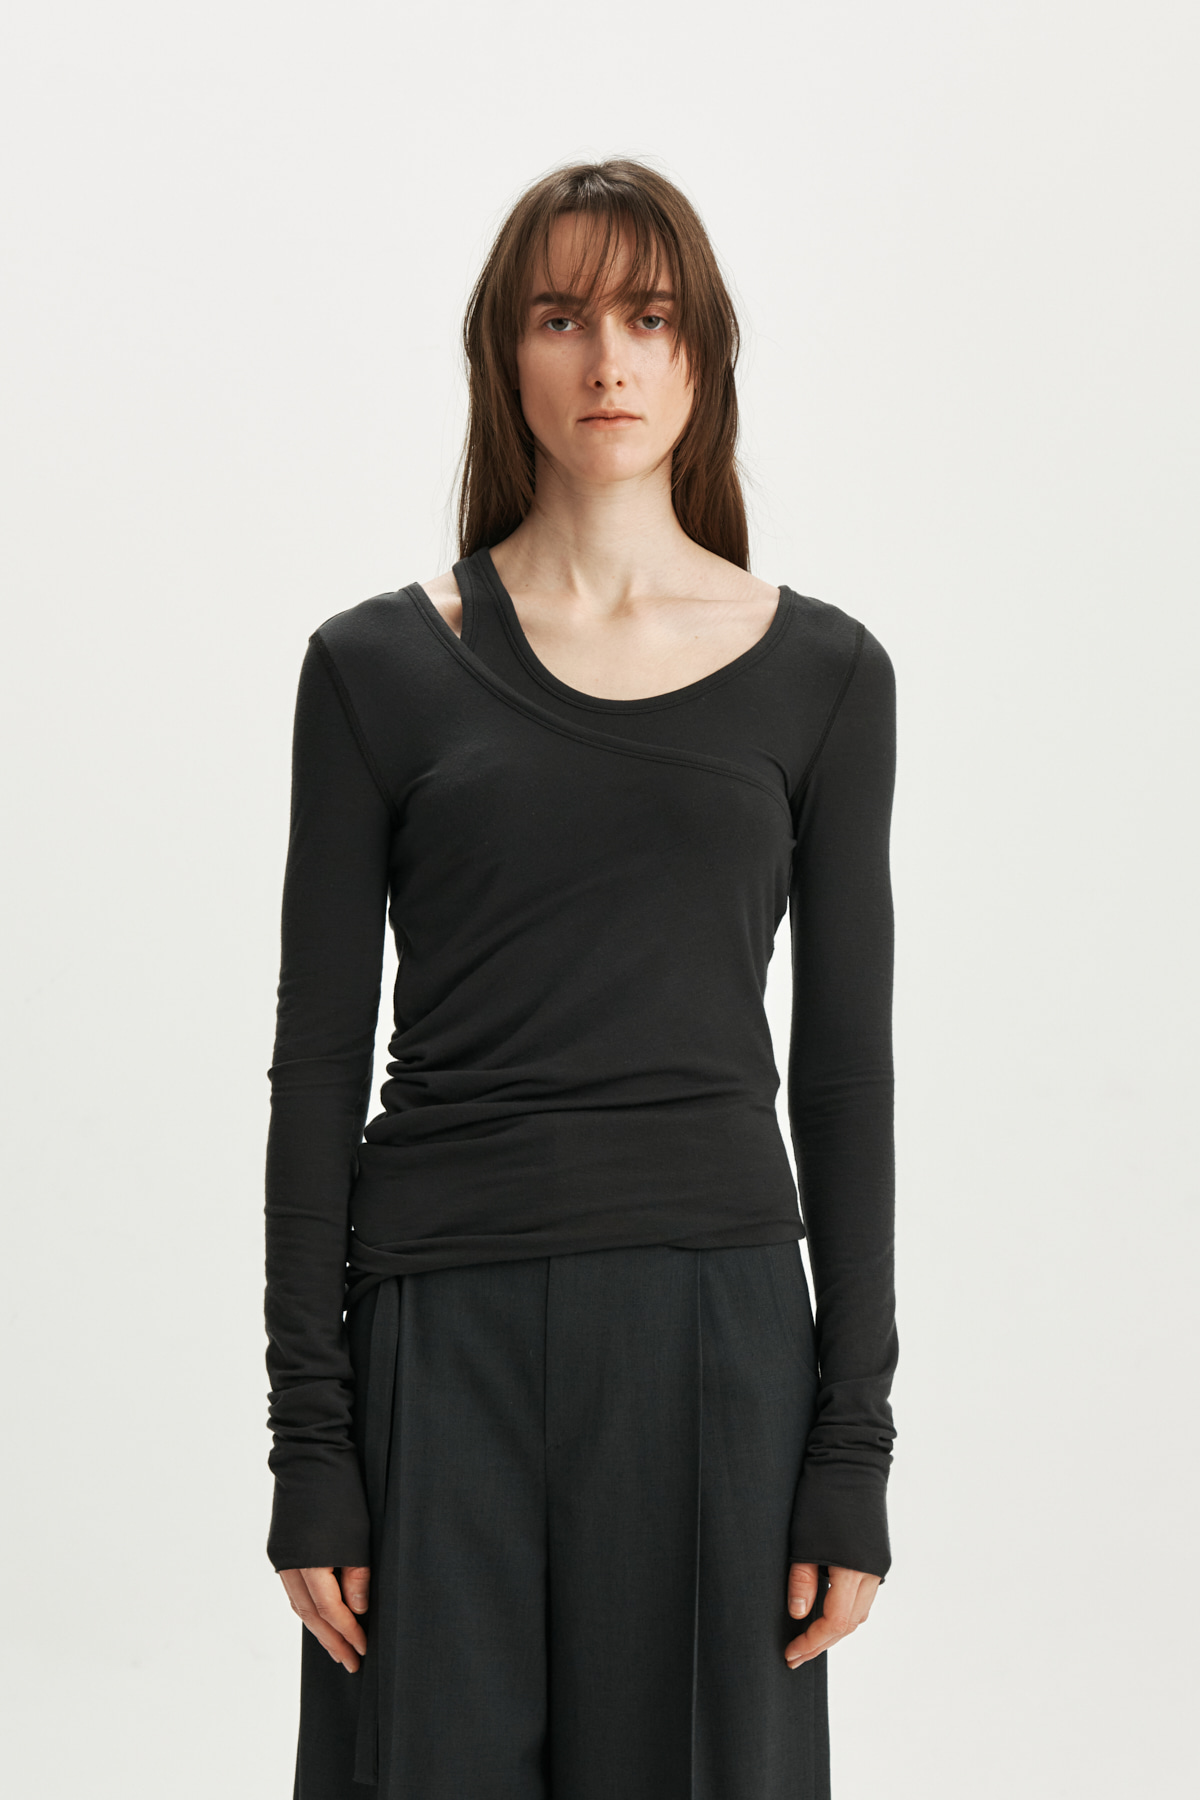 UNBALANCE DOUBLE LAYERED TOP IN CHARCOAL